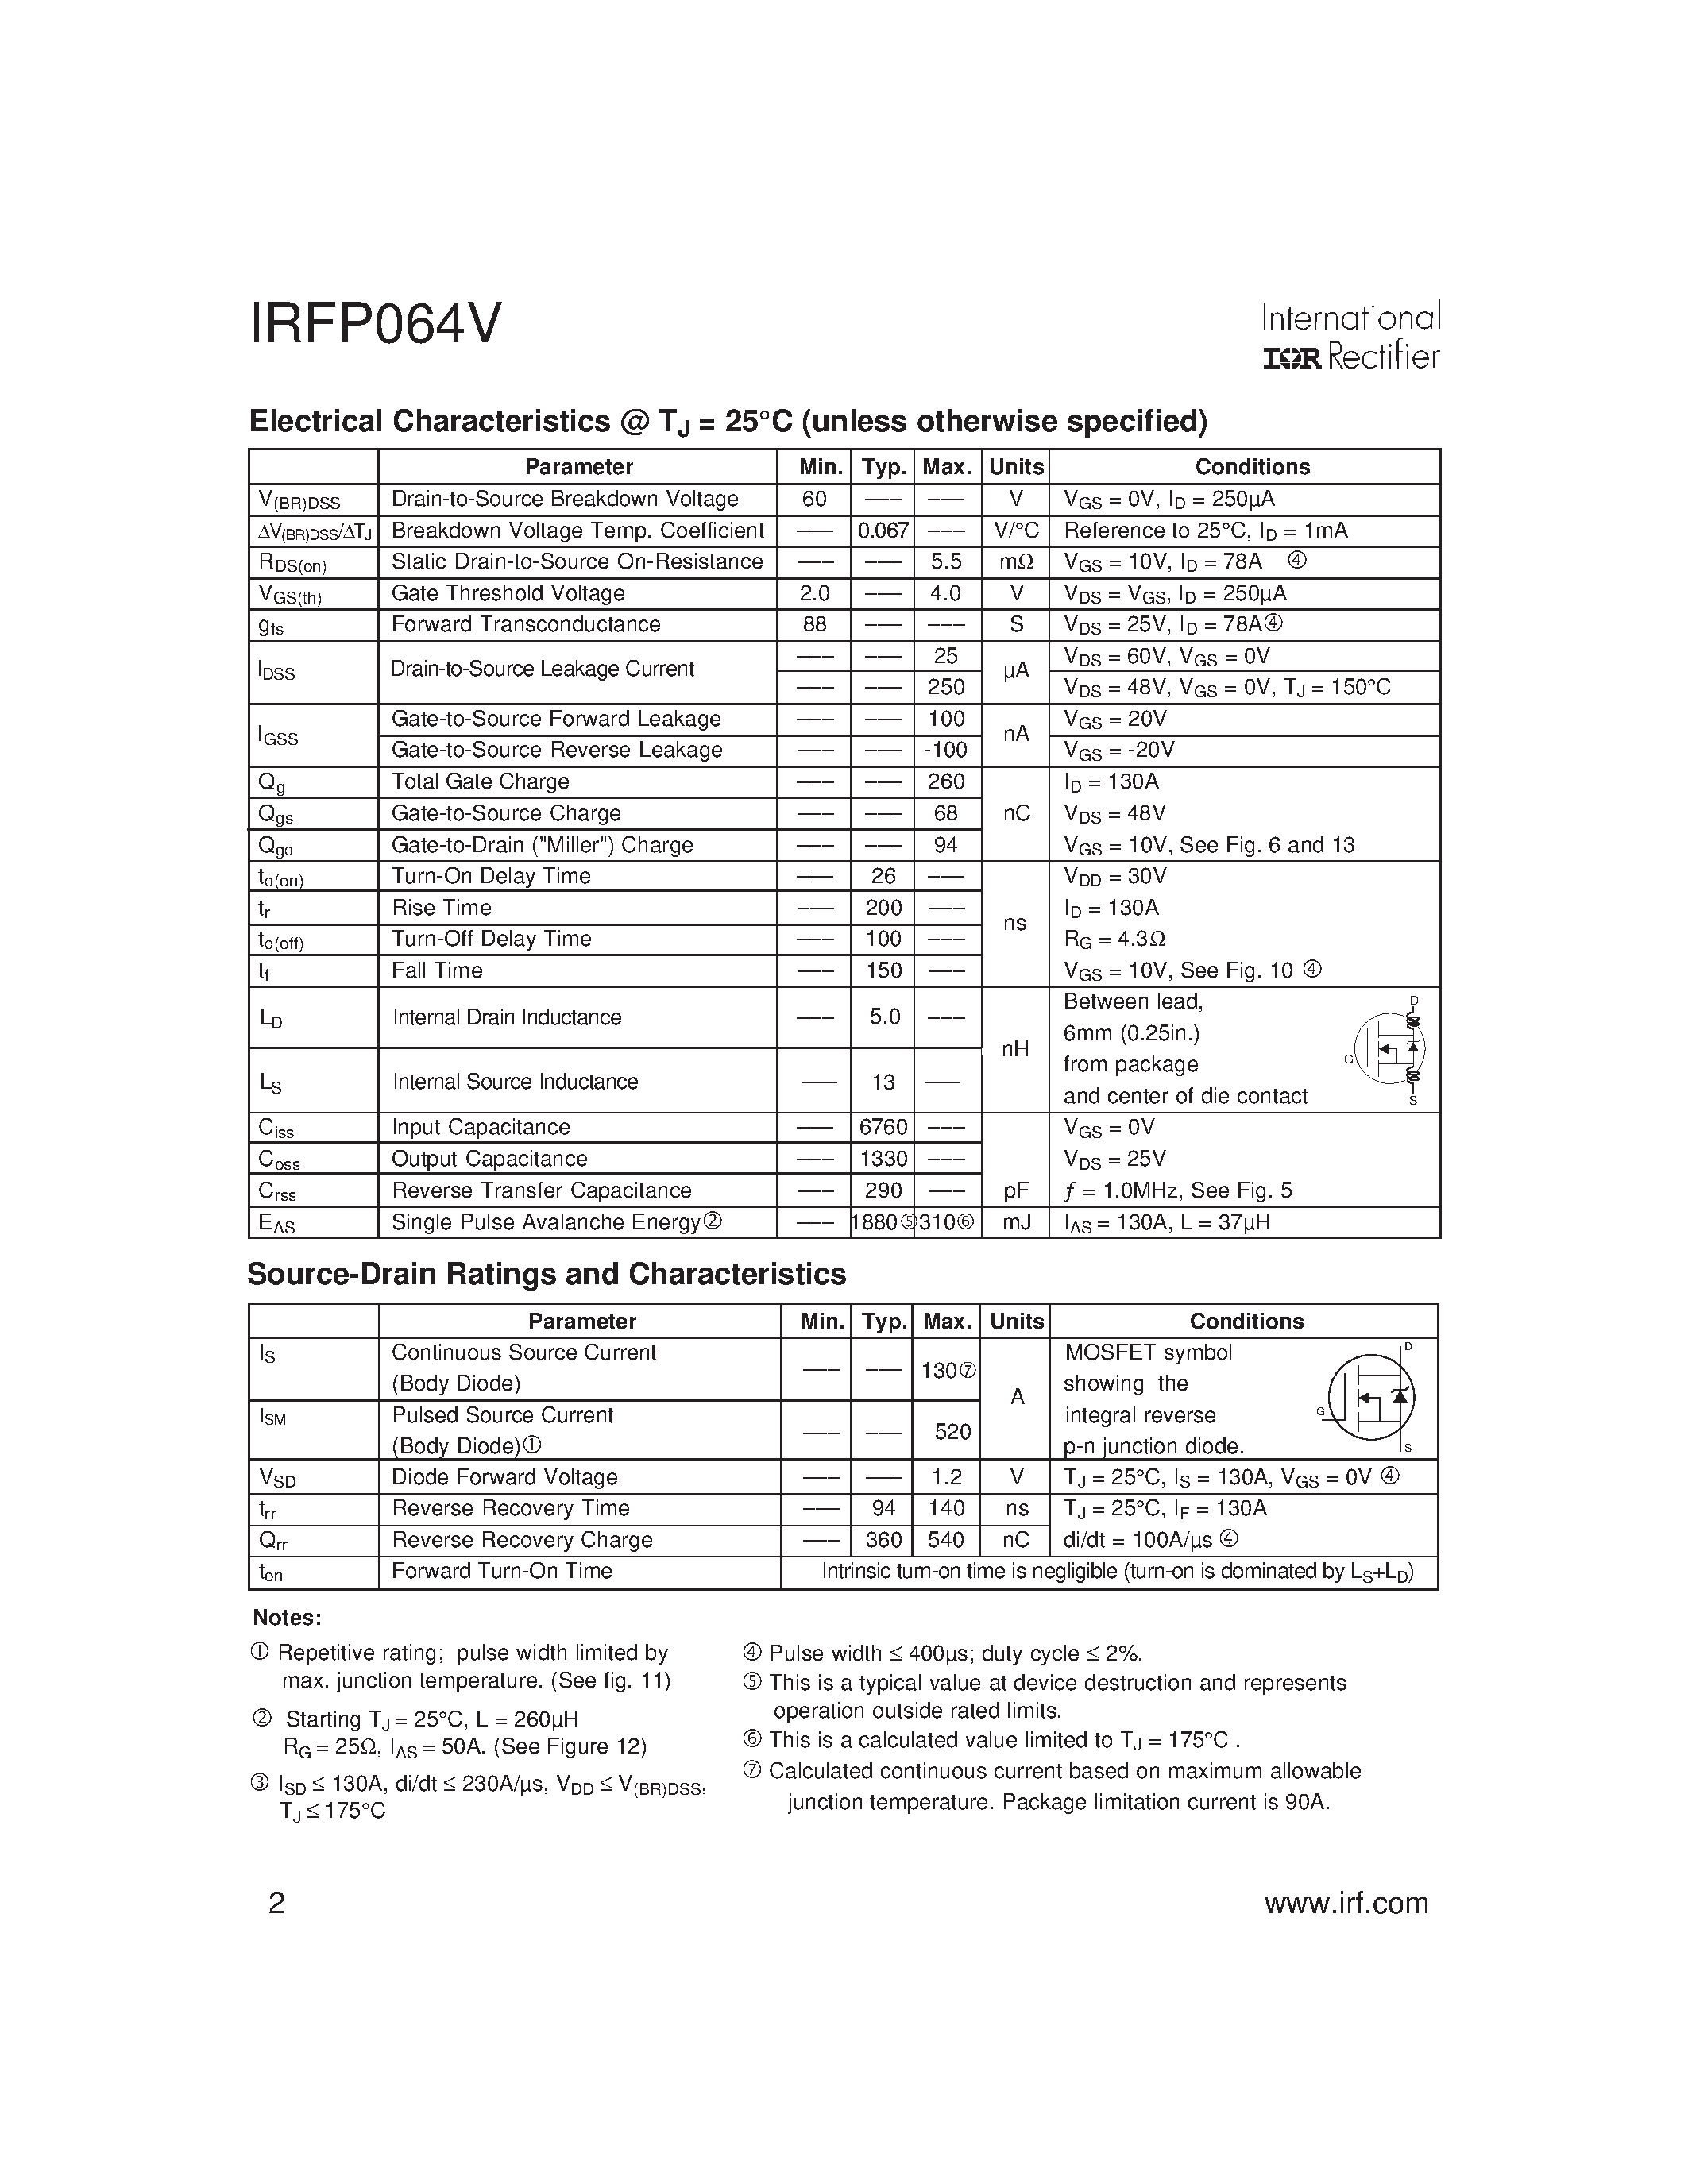 Datasheet IRFP064V - Power MOSFET page 2